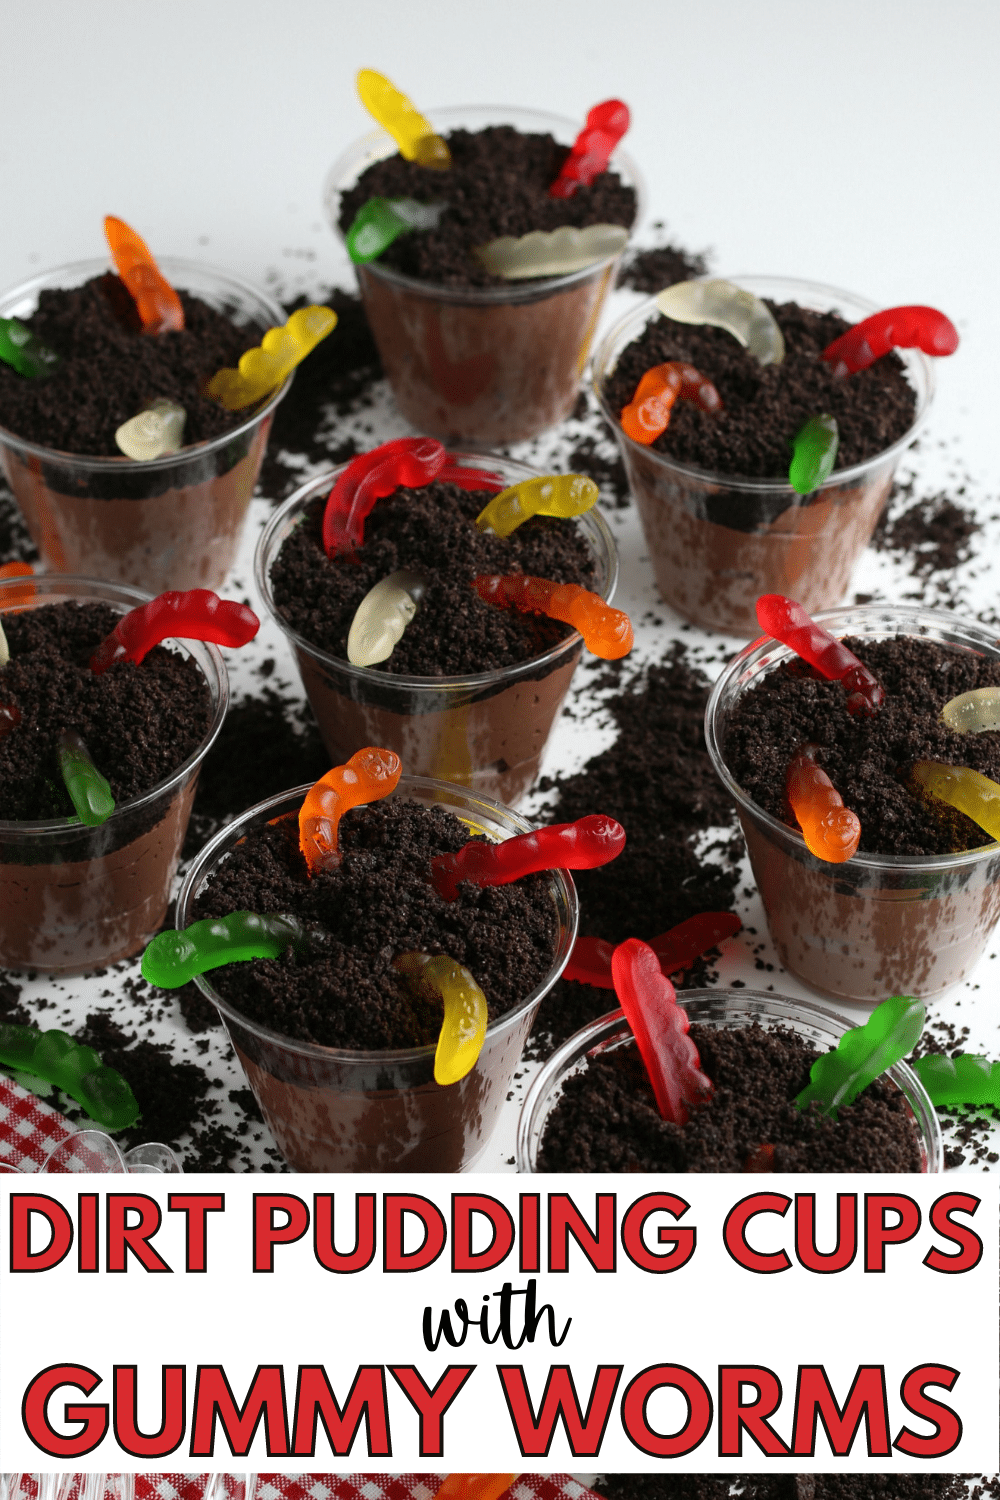 Dirt Pudding Cups with Gummy Worms are a fun snack for children and easy enough that they can help you make the treats. #puddingcups #dirtpudding #snacks via @wondermomwannab